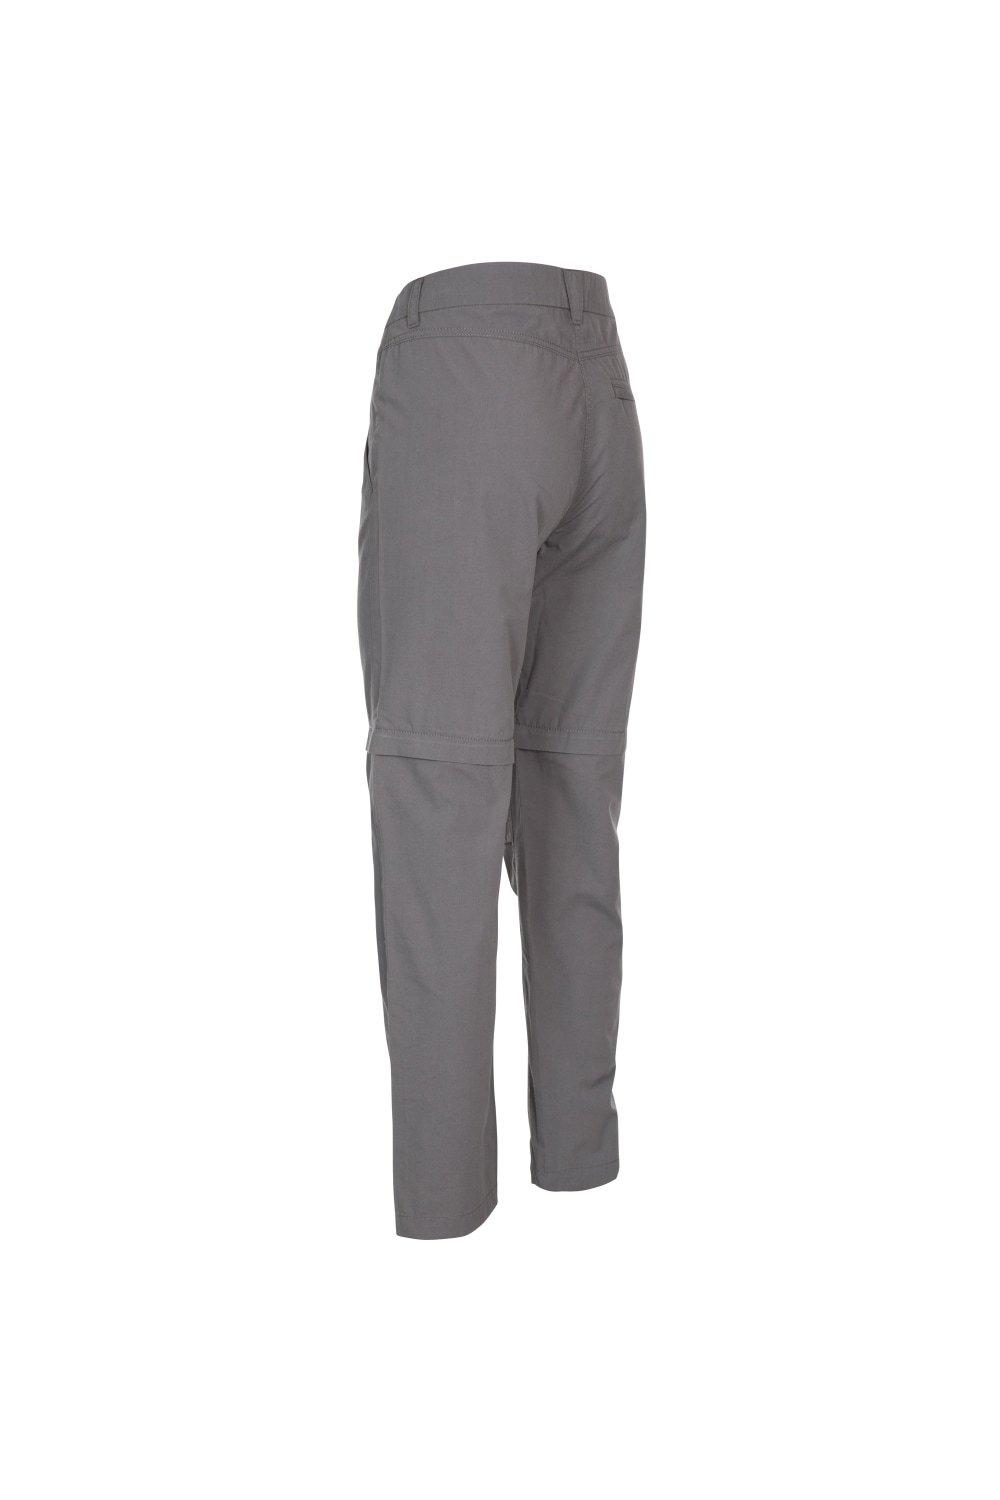 Trespass Mens Clifton Thermal Walking Trousers (Black) | Winfields Outdoors